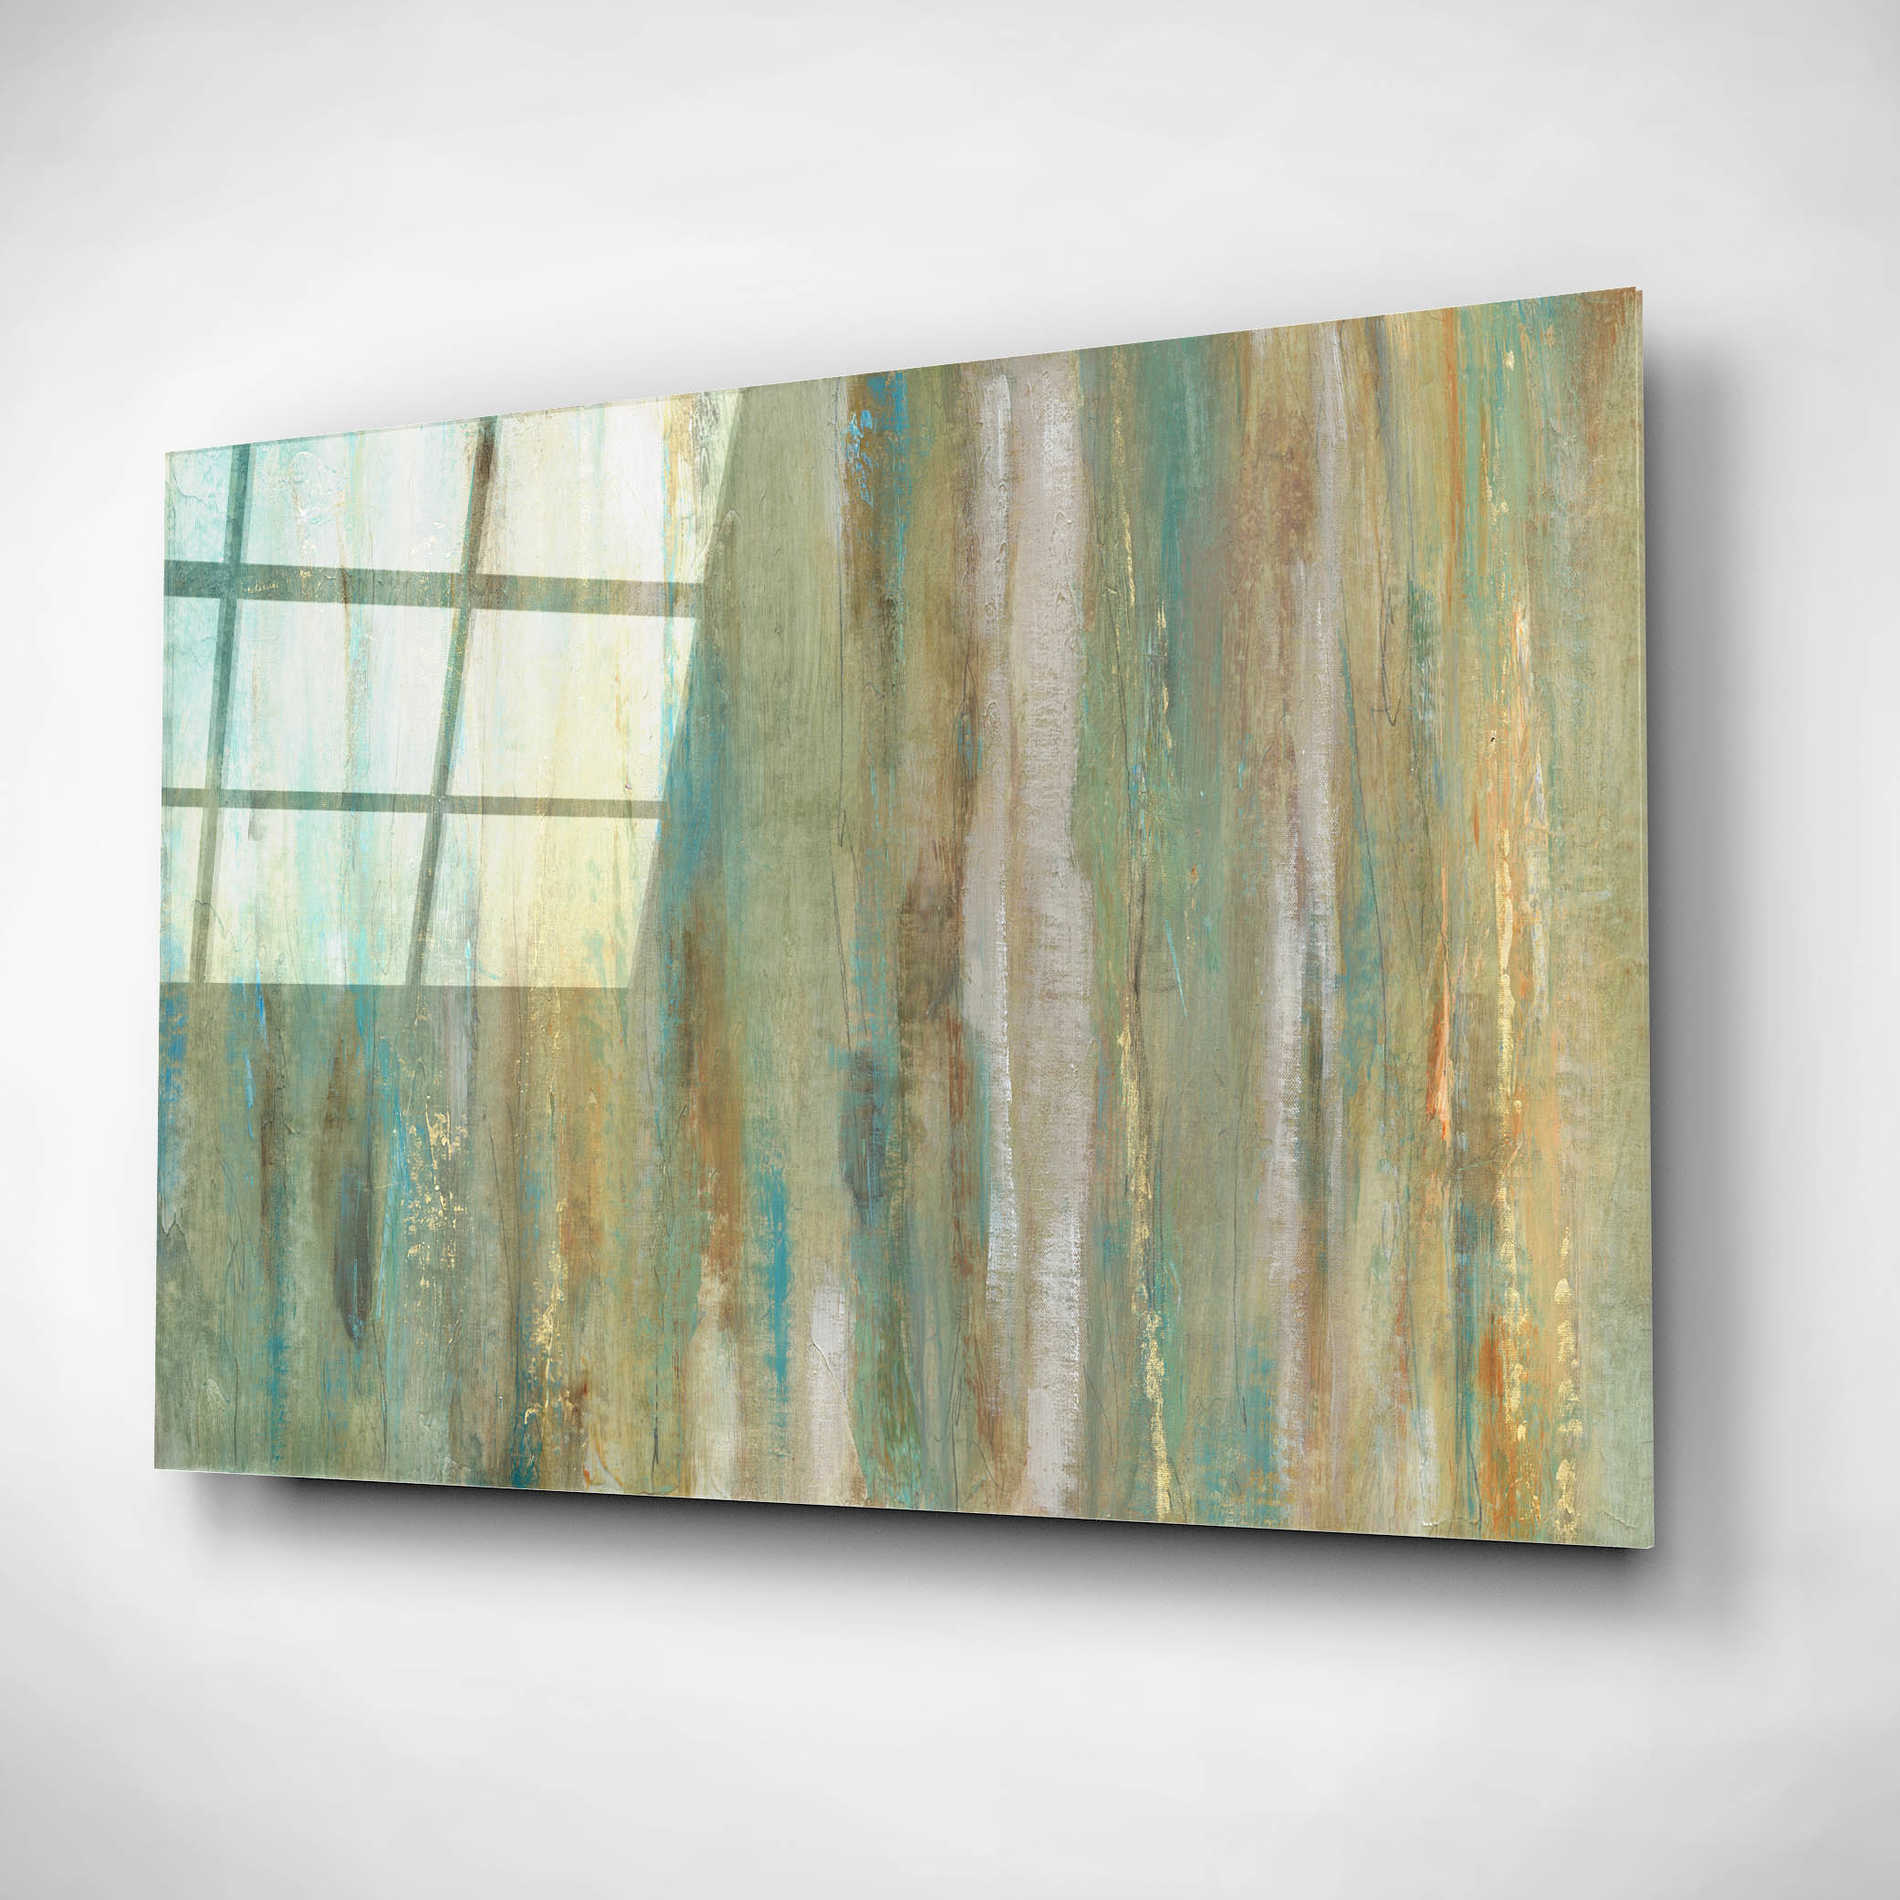 Epic Art 'Vertical Flow I' by Tim O'Toole, Acrylic Glass Wall Art,16x12